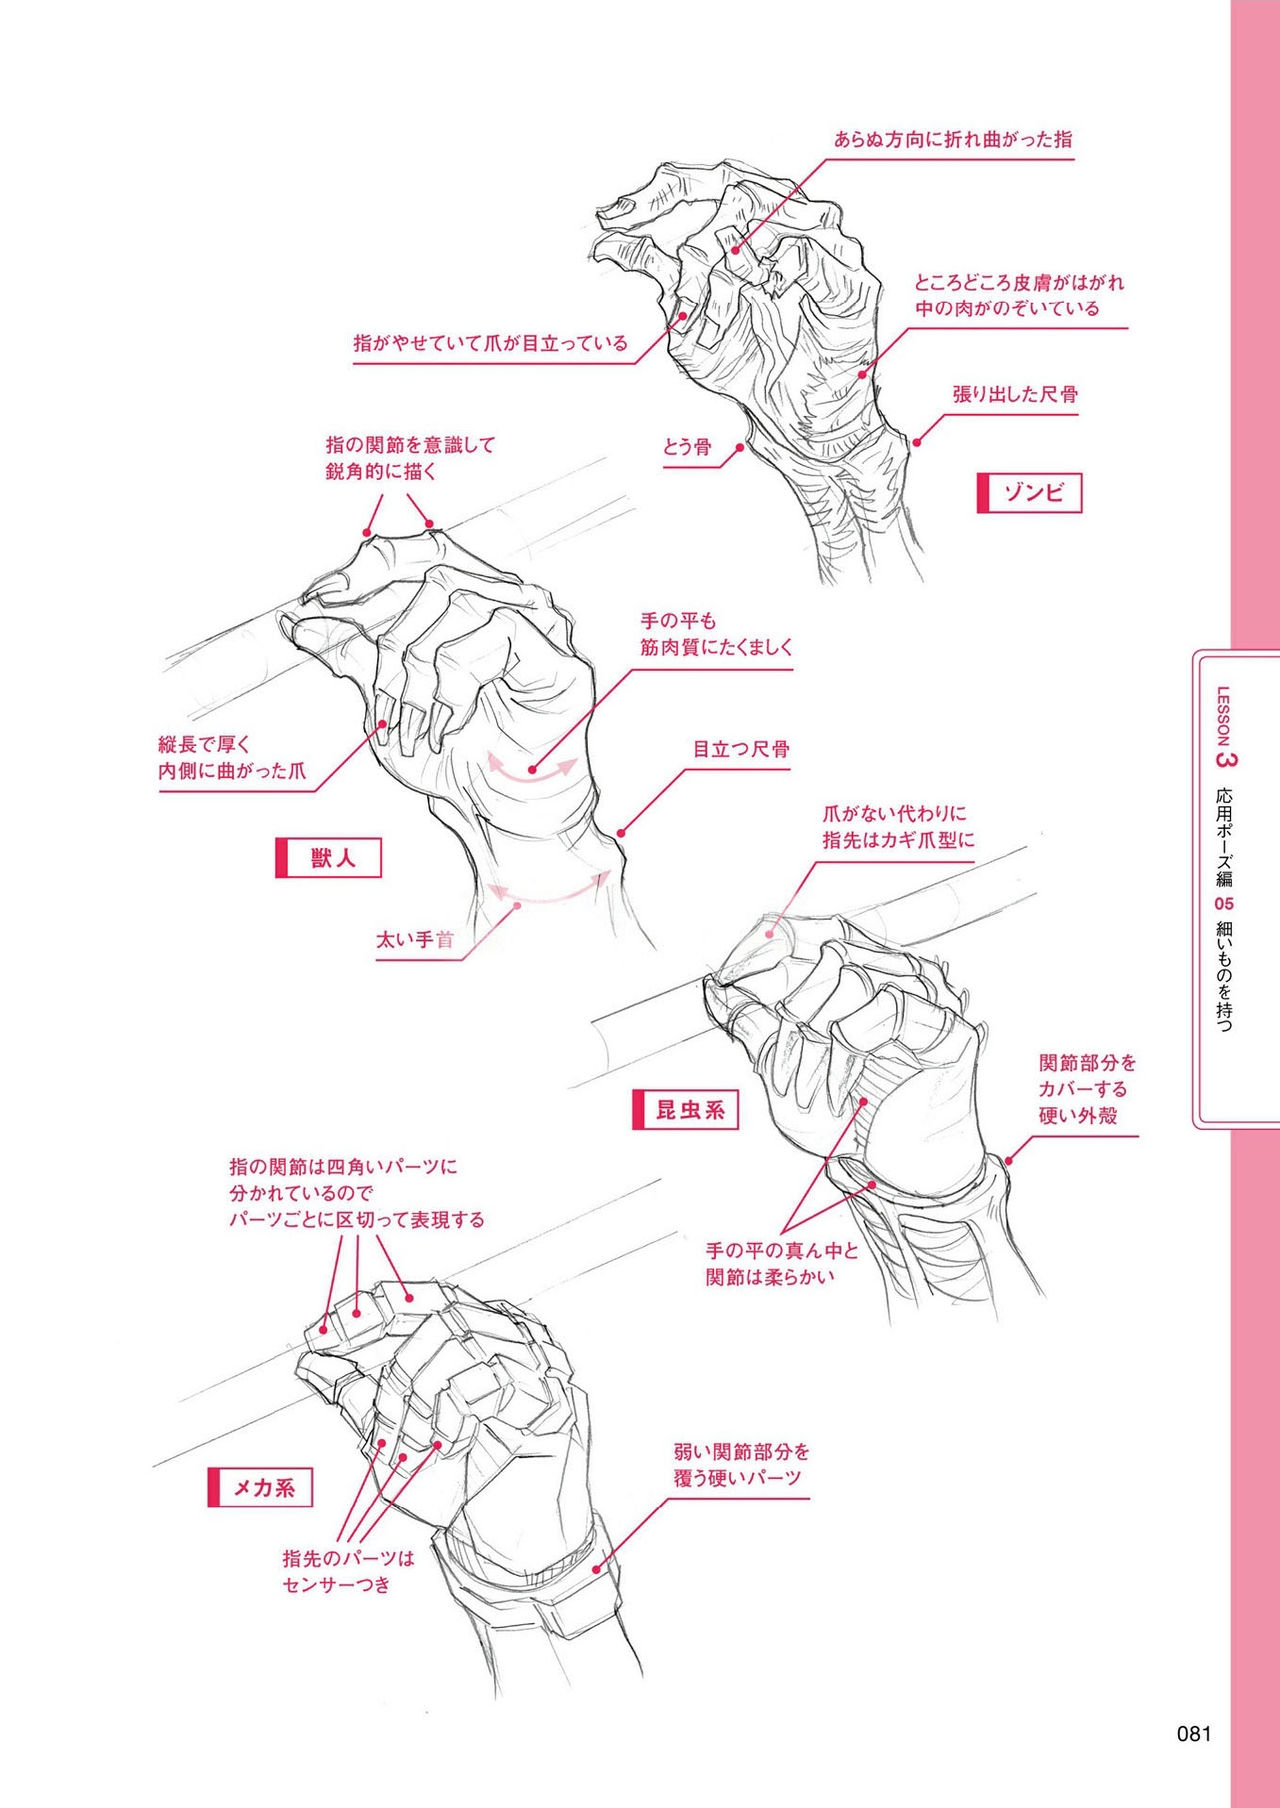 How to draw hands 81